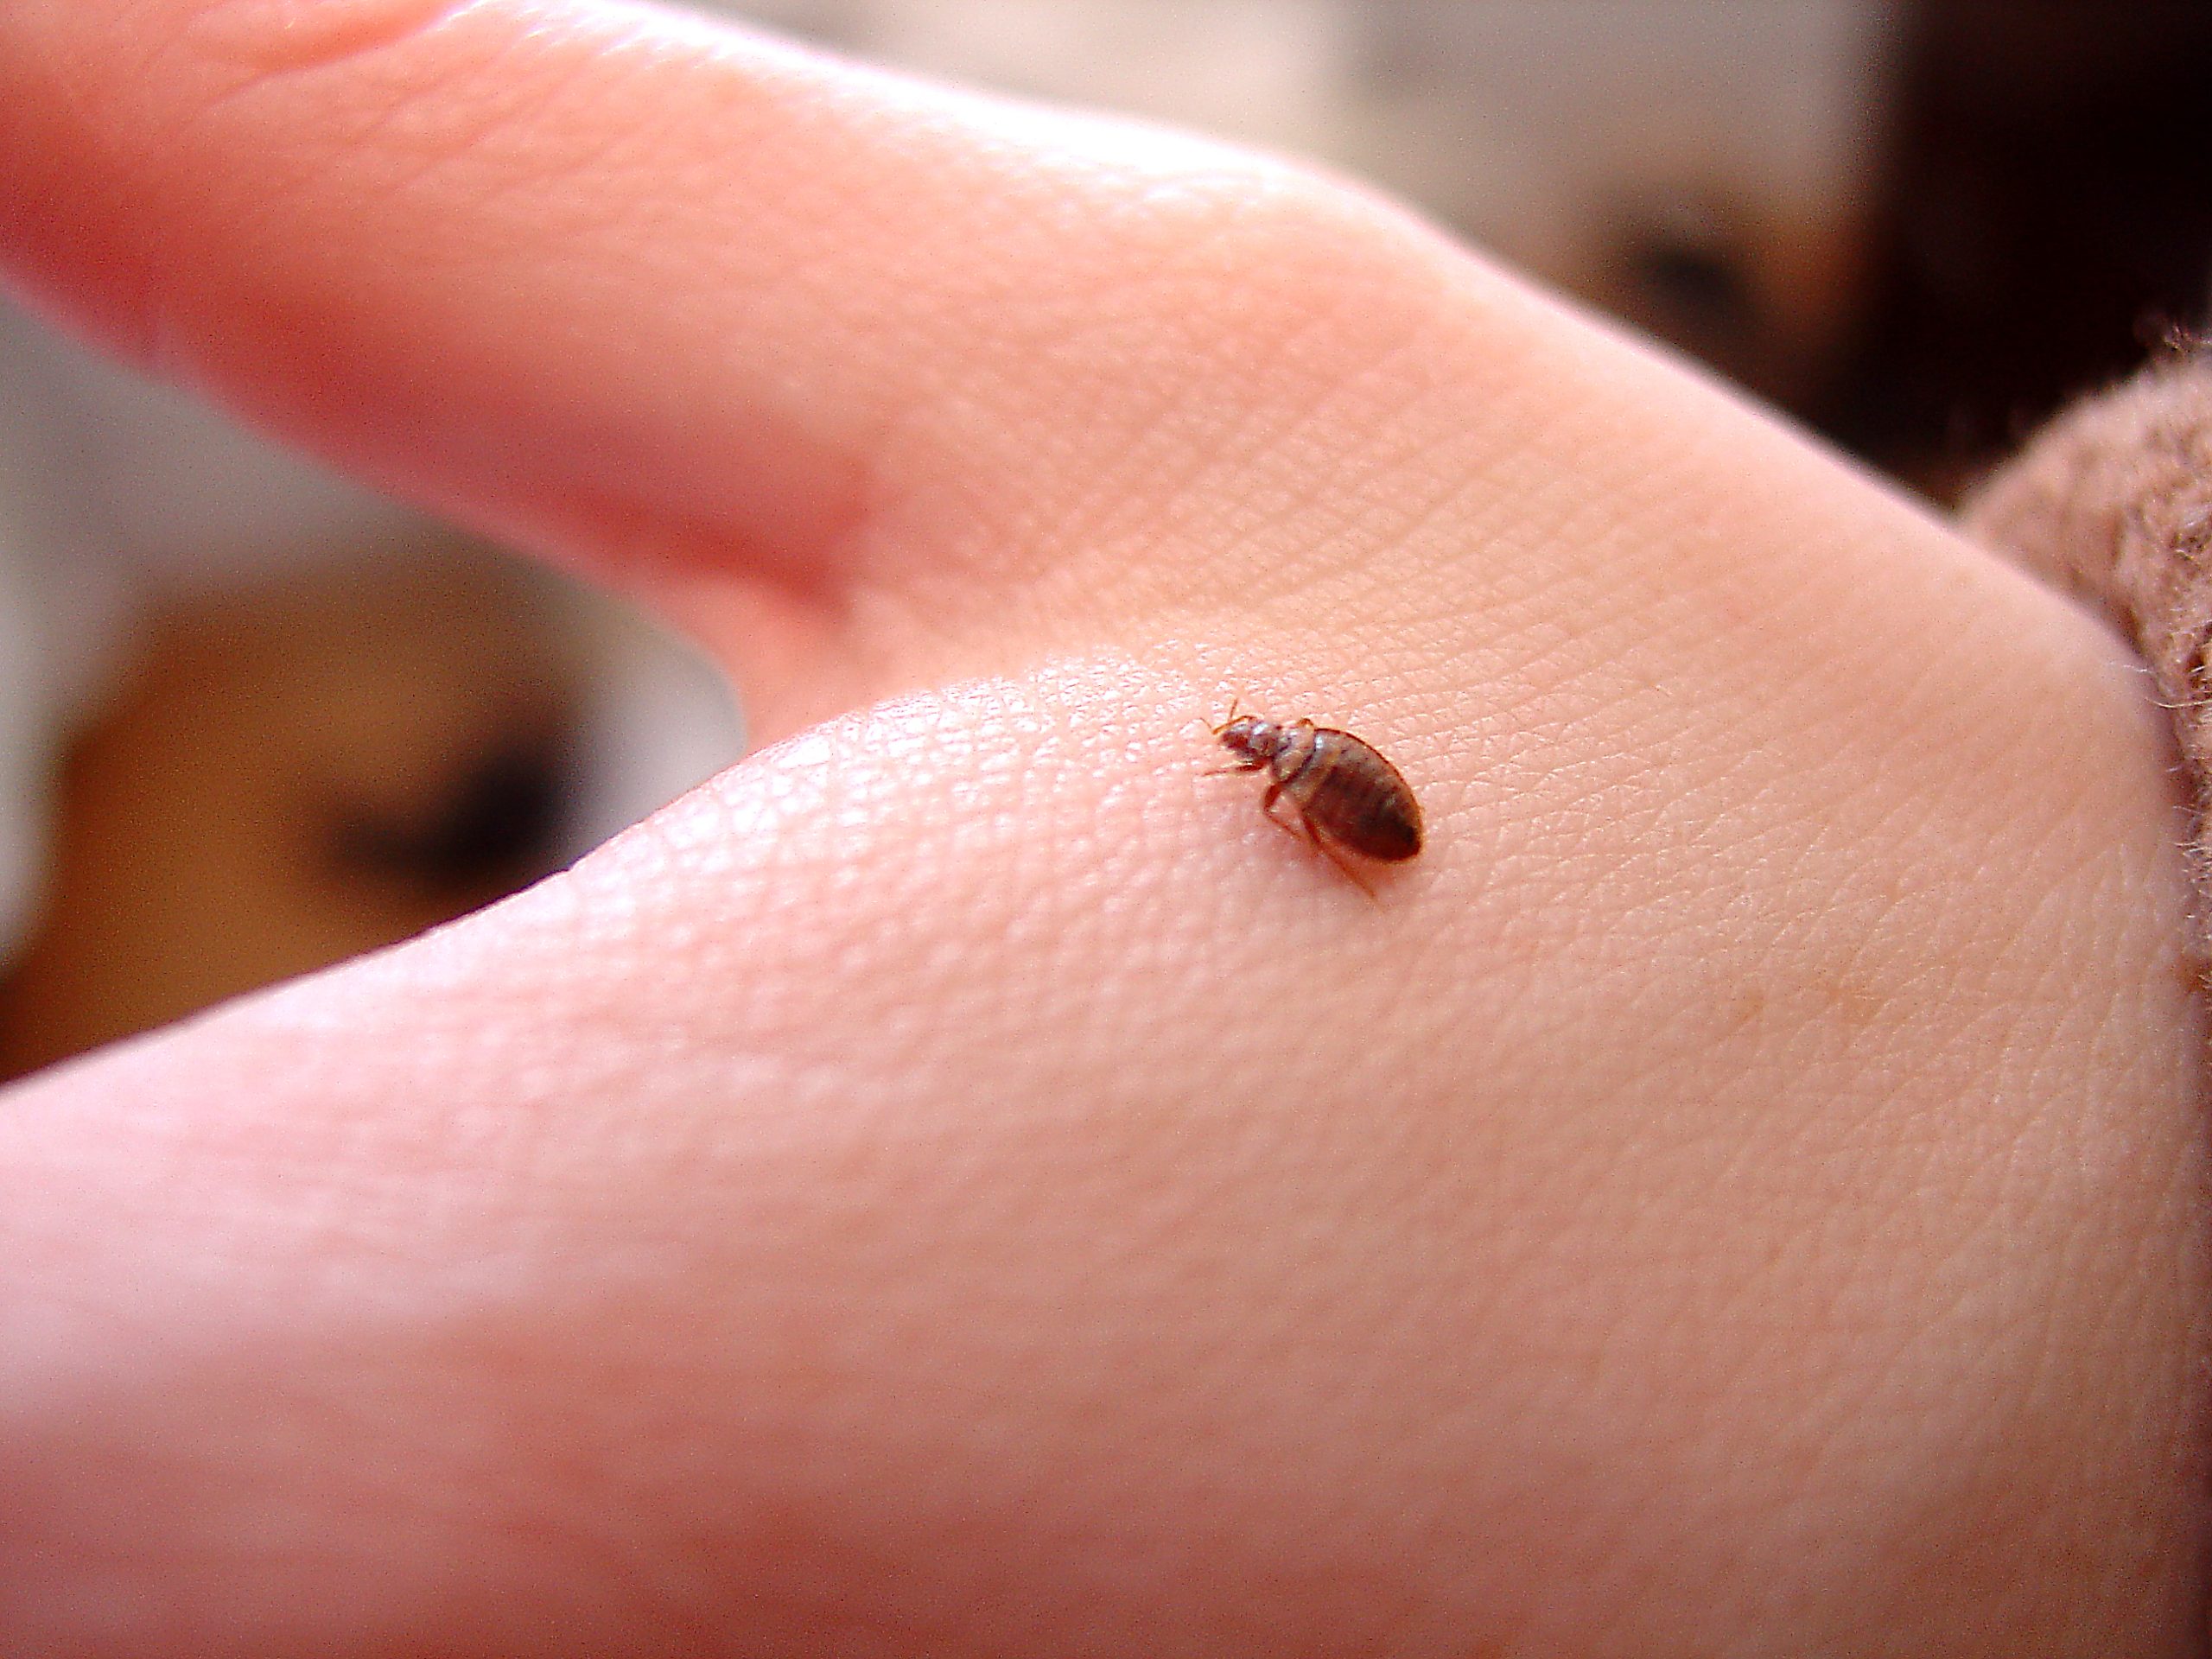 Why Bed Bugs Increase In Summer Months